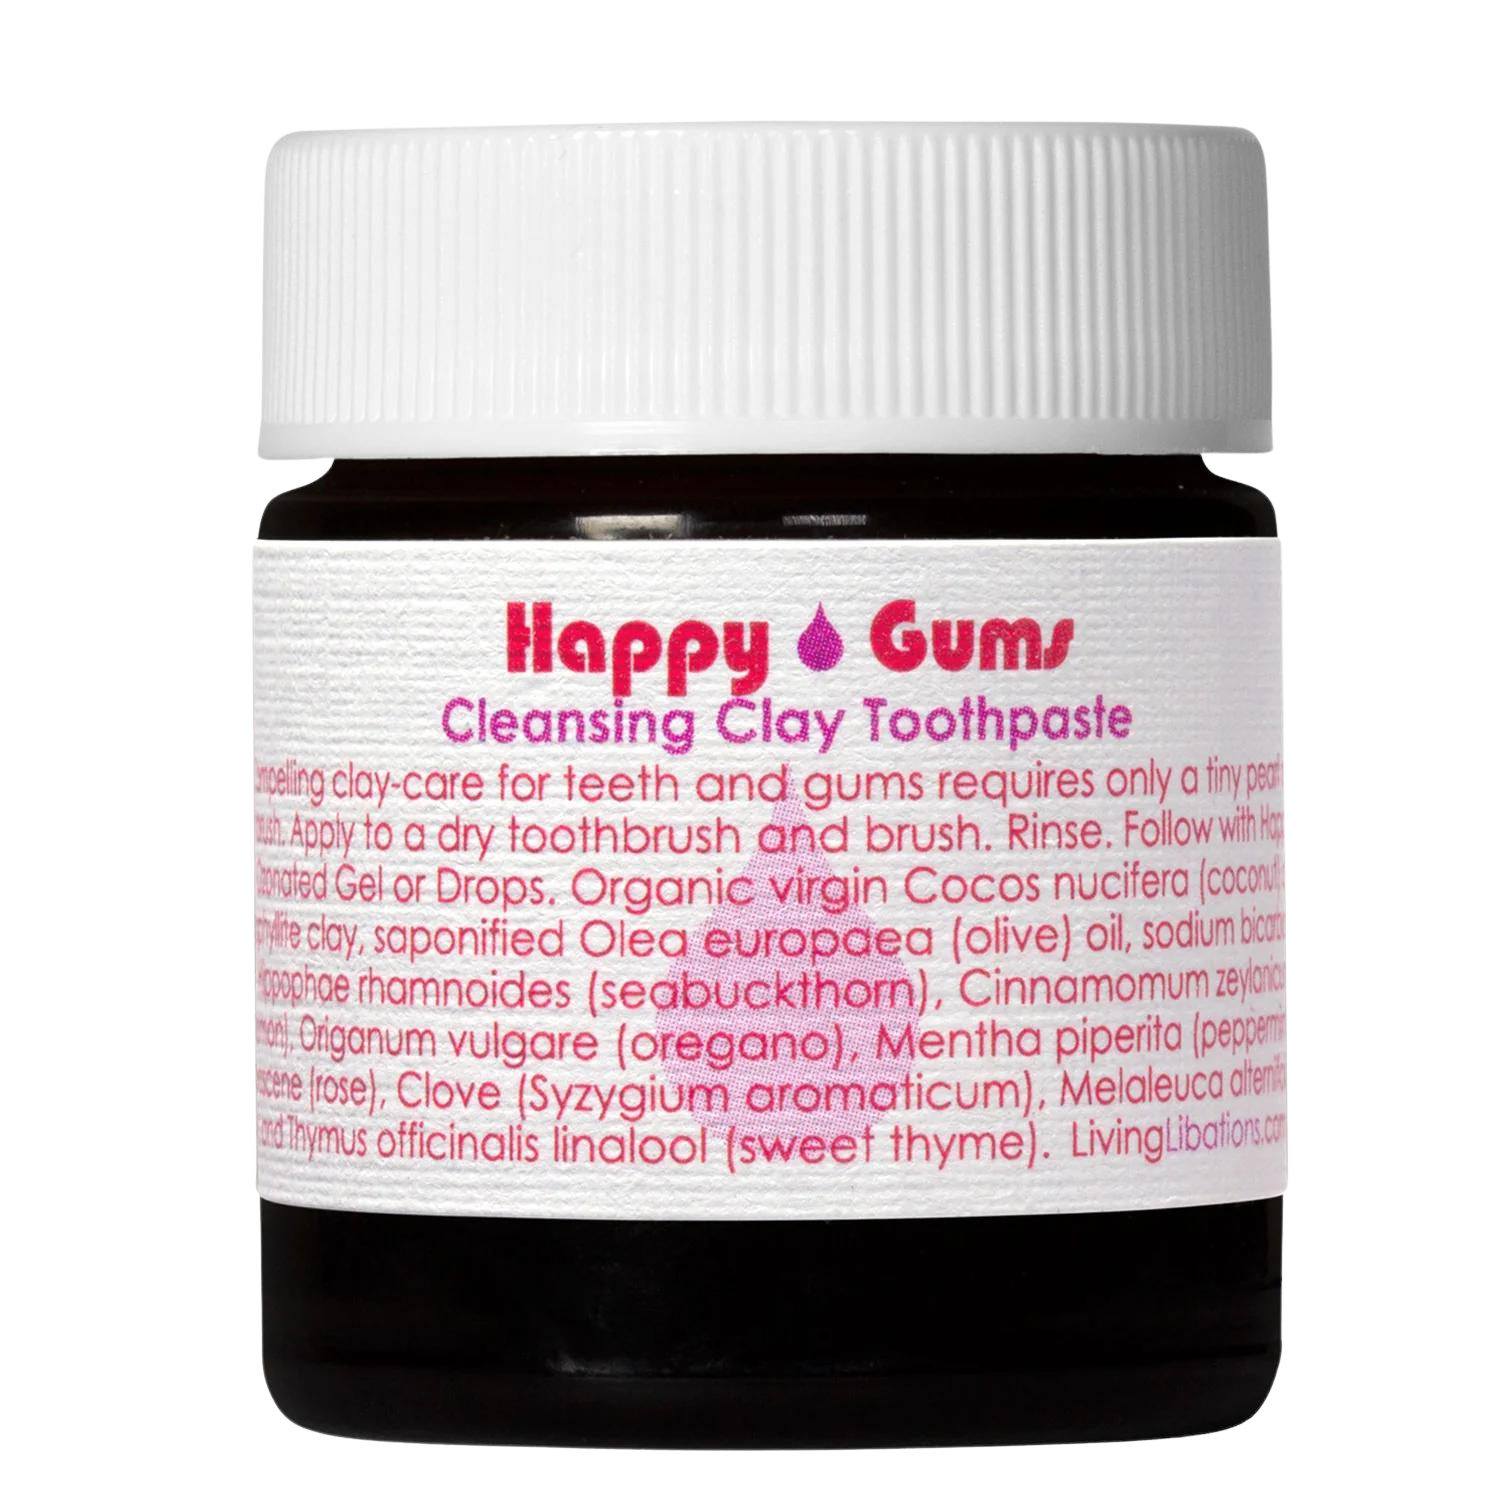 Happy Gums Cleansing Clay Toothpaste - 15ml